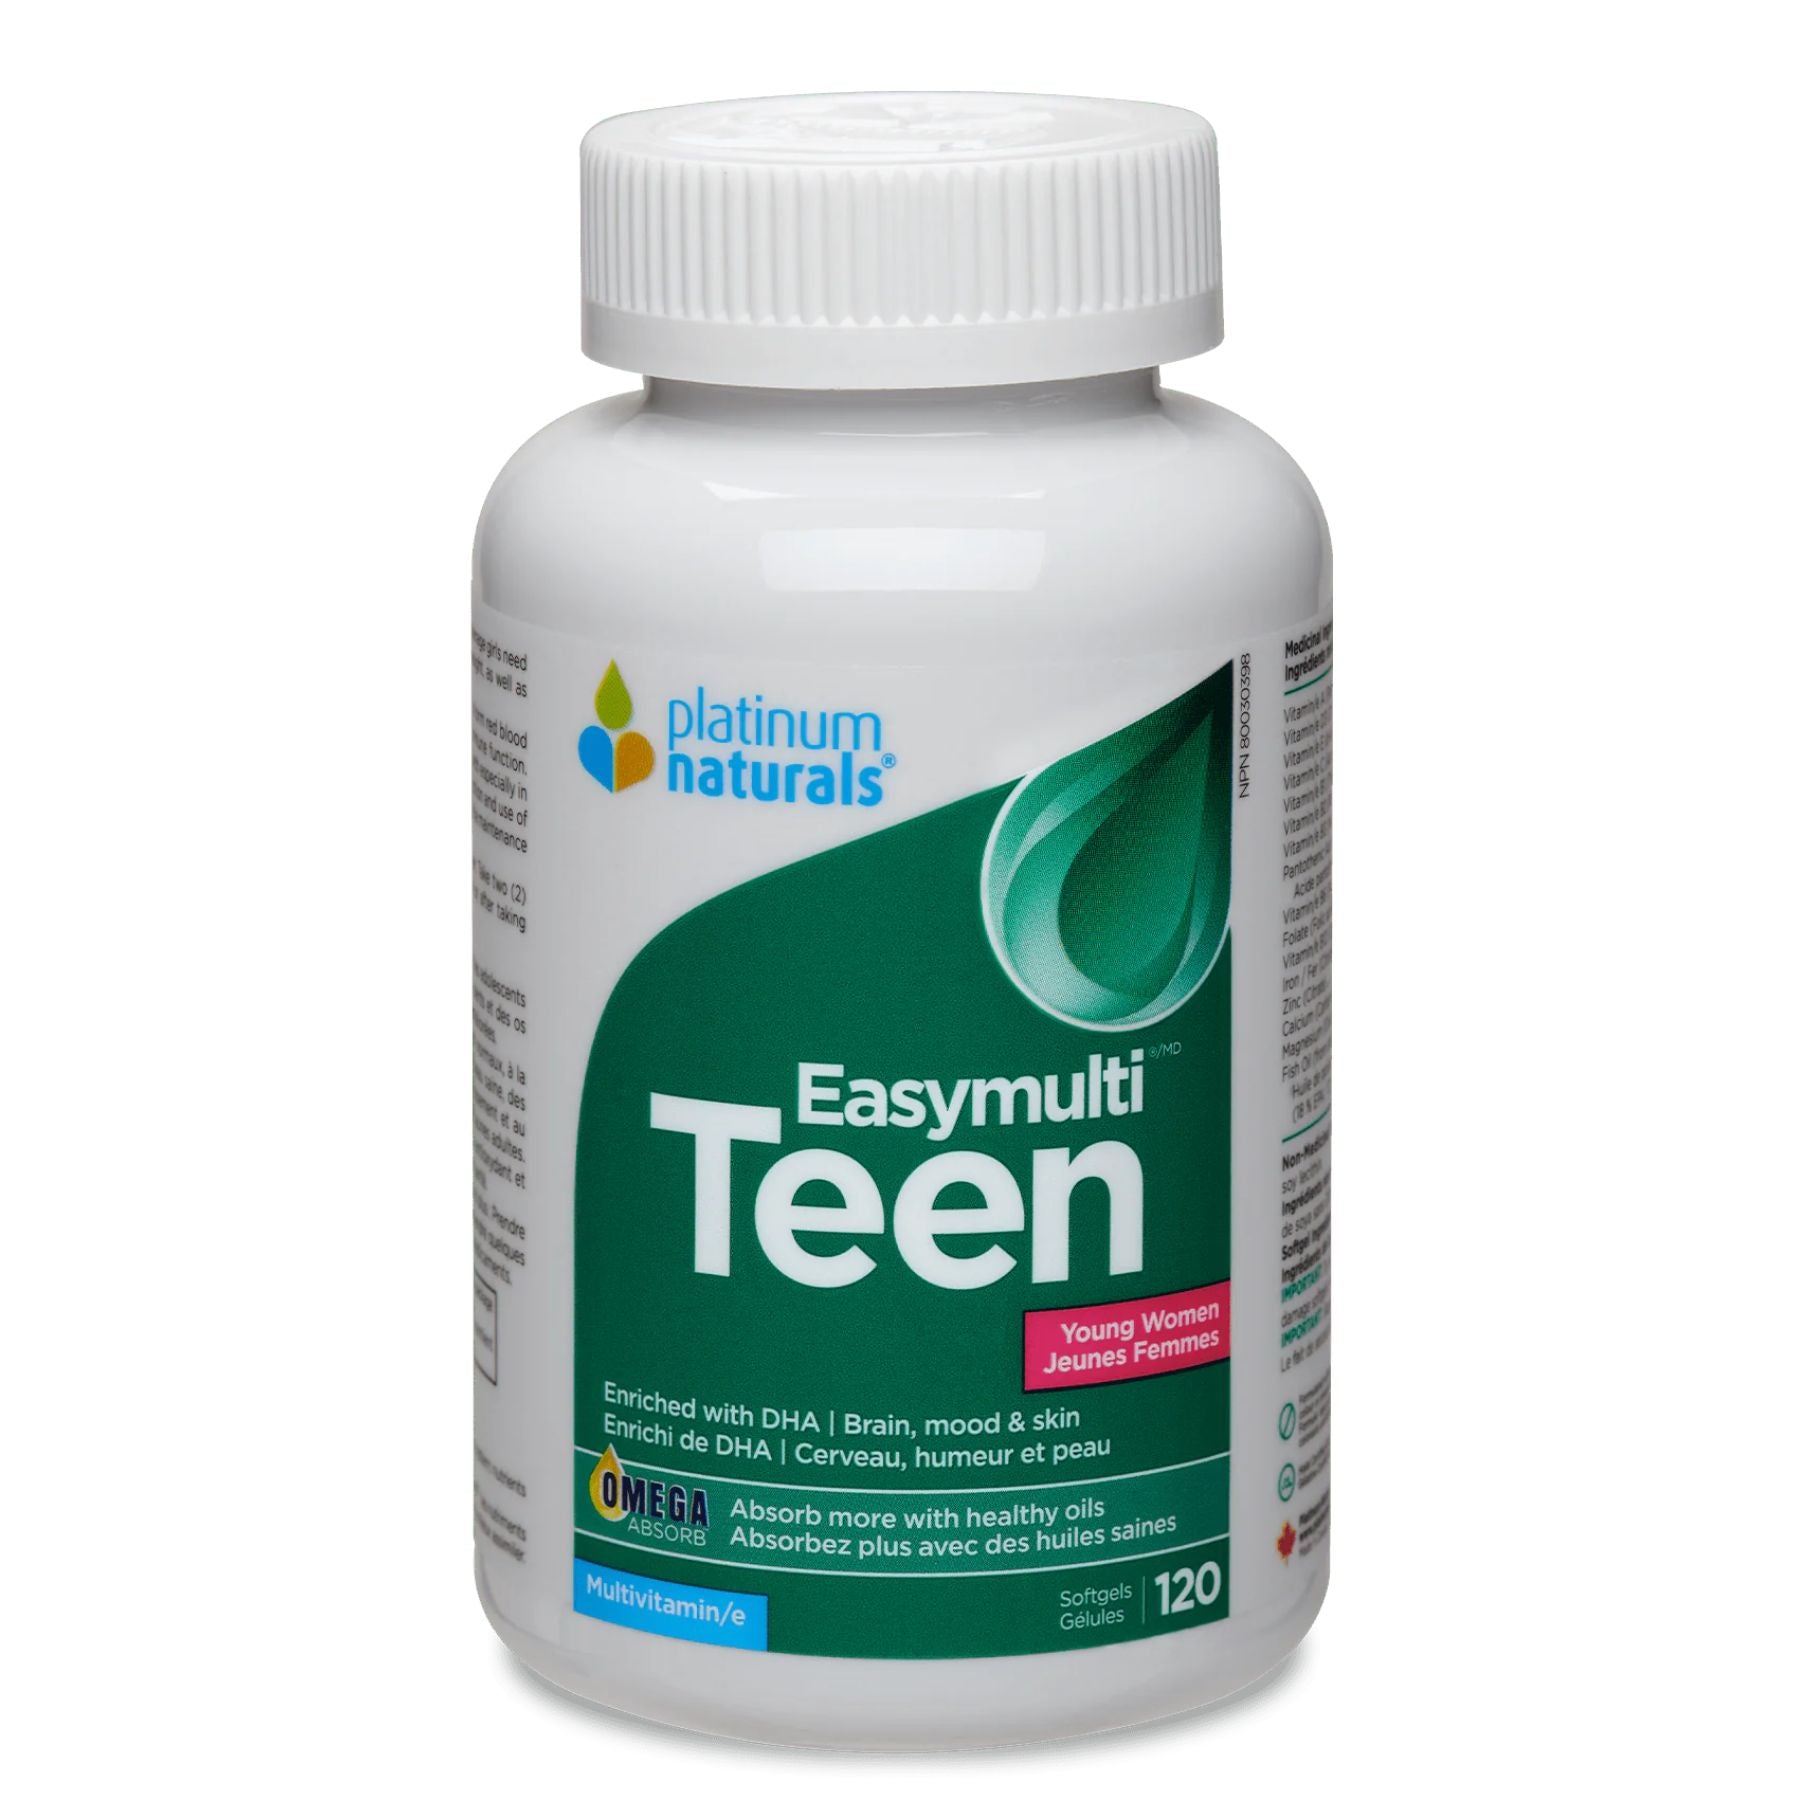 Platinum Naturals Easymulti Teen for Young Women 120s